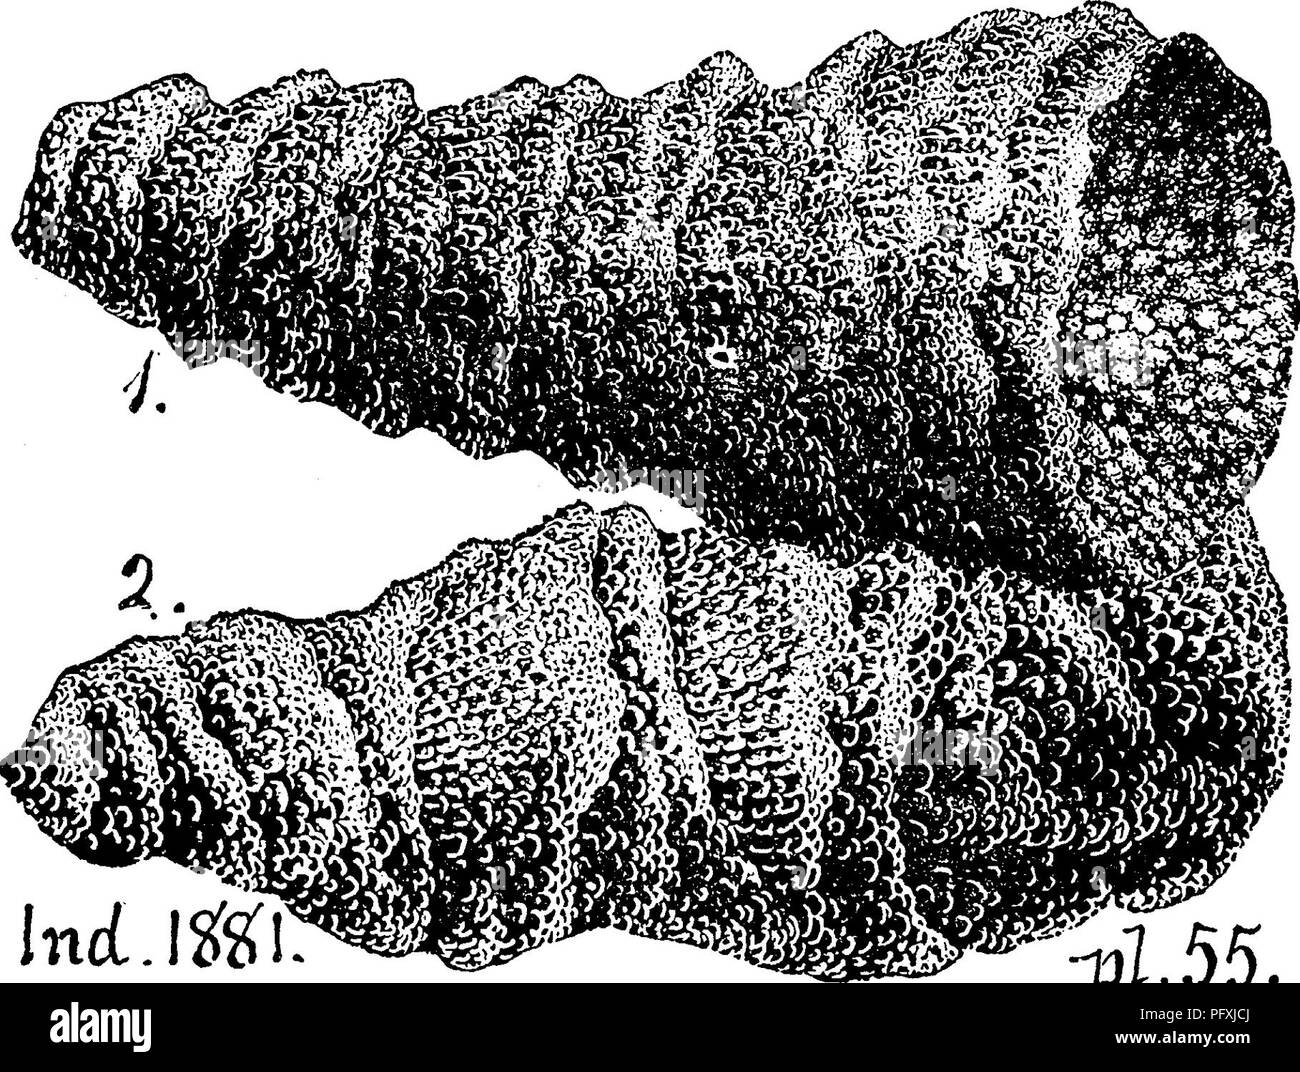 . A dictionary of the fossils of Pennsylvania and neighboring states named in the reports and catalogues of the survey ... Paleontology. Oast. 186. Cystiphyllum sulcatum. Compare Coleophyllum pyri- forme. Villa. Cystiphyllum vesiculosum. (Goldfuss.) A widely dis- tri bu te d species on both sides of the Atlan- tic. (Nich- olson. Pal. of Ontario, 1874, p. 37.) CoUett's In- diana Re- port of 1881, page 391, plate 55, ... ^^ figs. 1,2, two â ^l.DD. specimens with much of their skin (epitheca) dissolved, drawn by Van Oleve.âForm very variable; but sack or little bladder-like interior structure alw Stock Photo